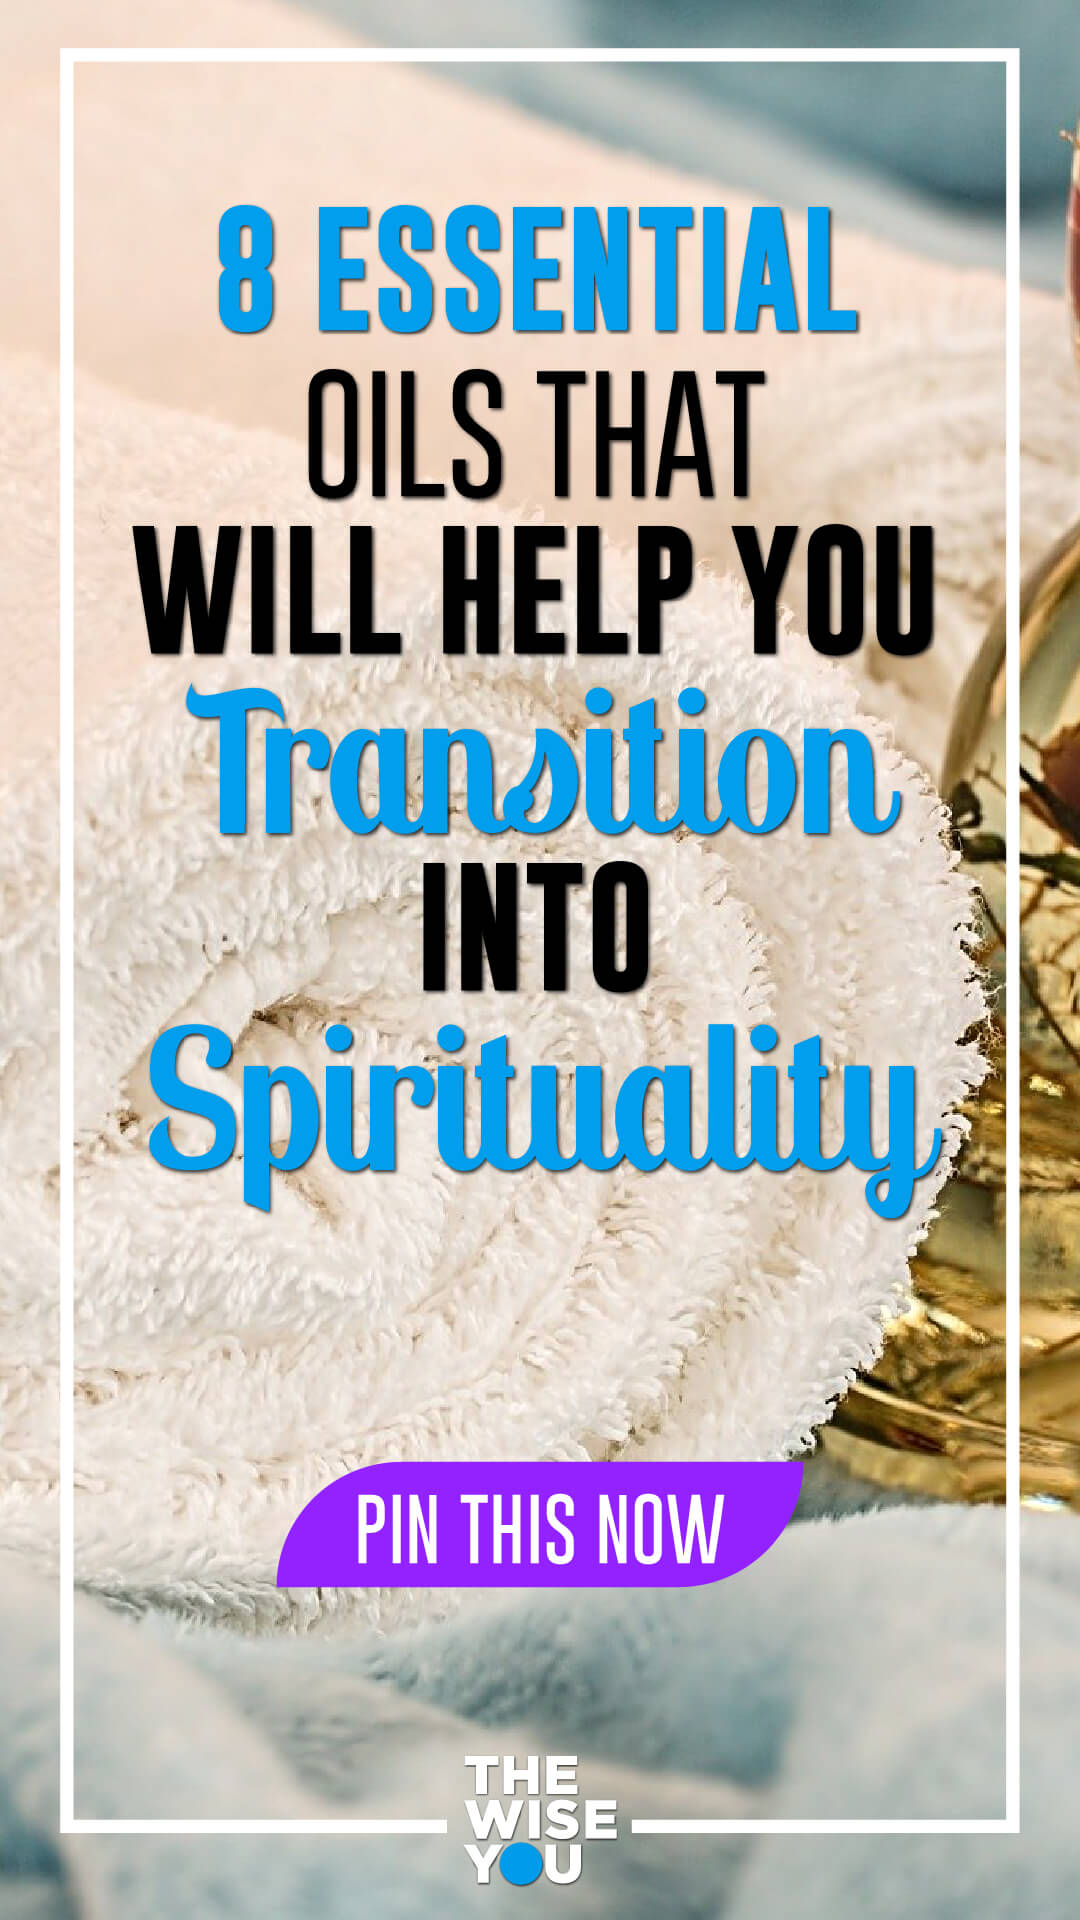 8 Essential Oils That Will Help You Transition Into Spirituality